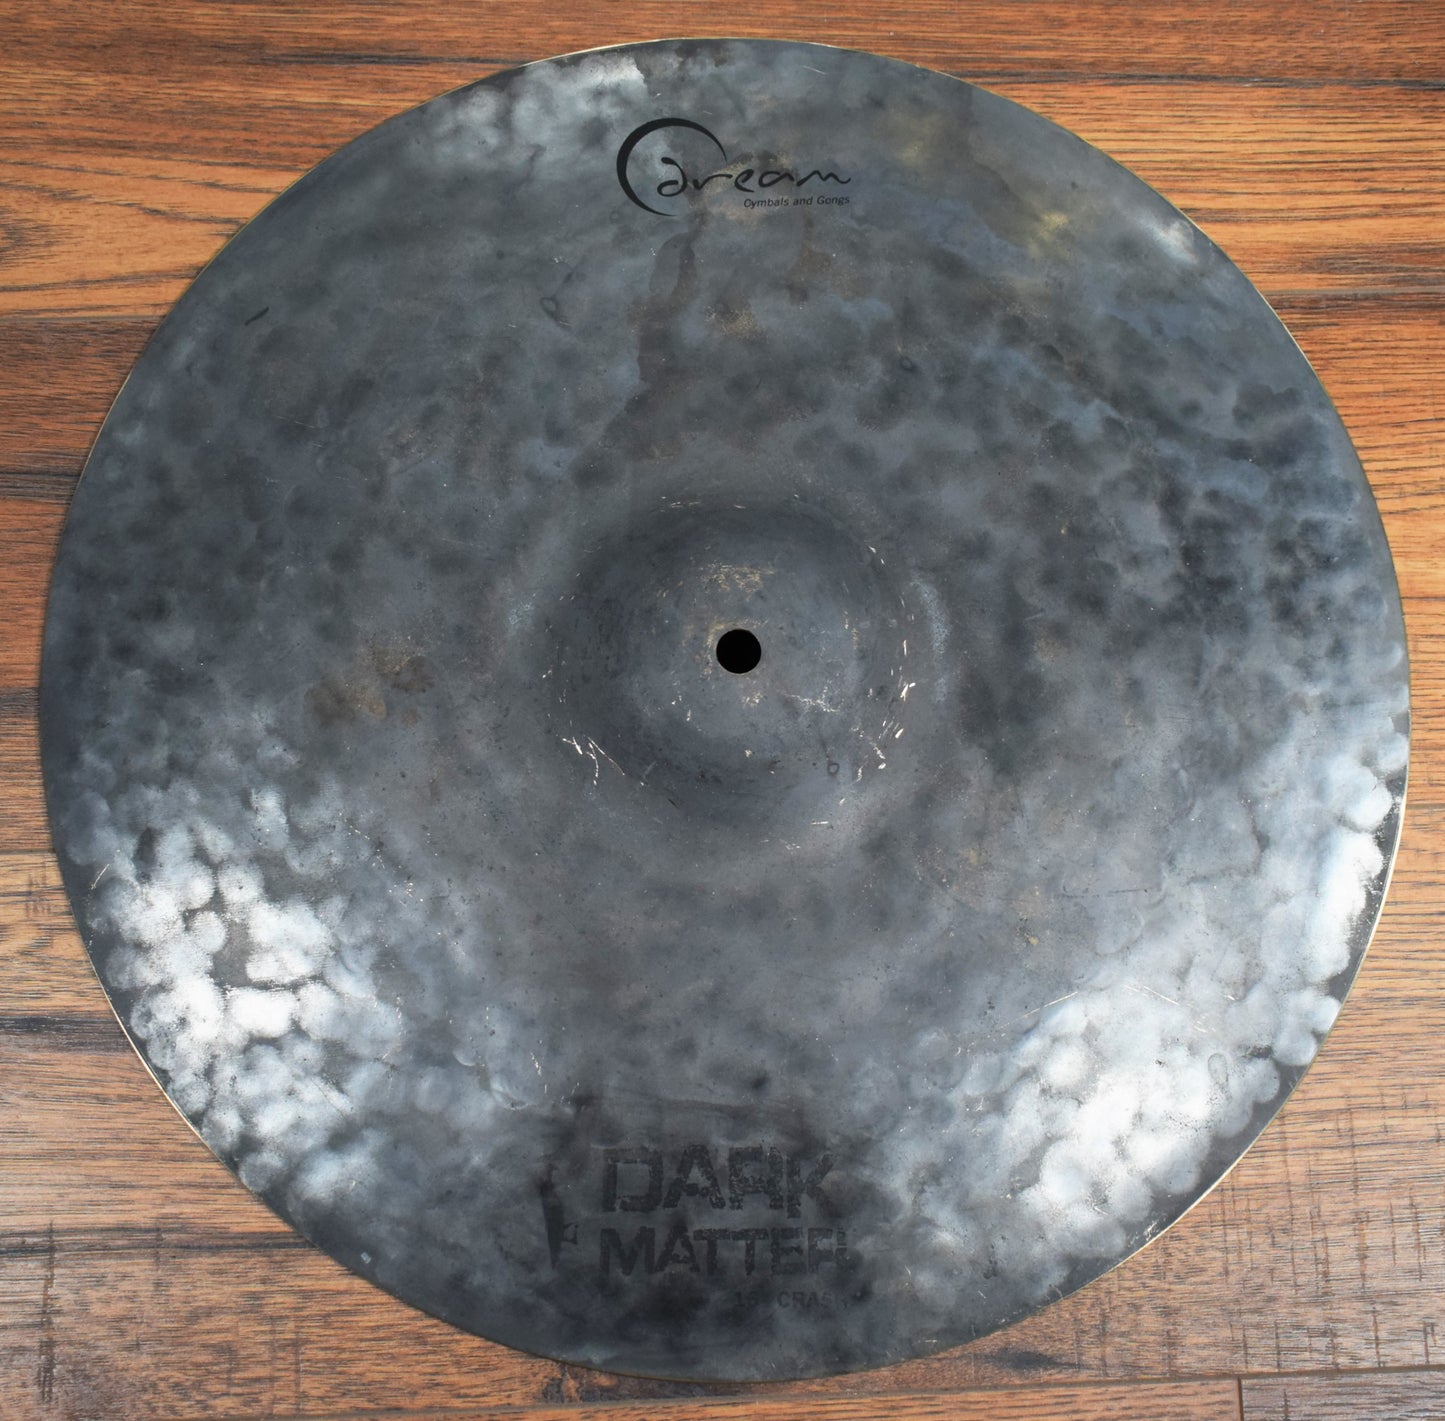 Dream Cymbals DMECR16 Dark Matter Series Hand Forged & Hammered 16" Energy Crash Cymbal Demo